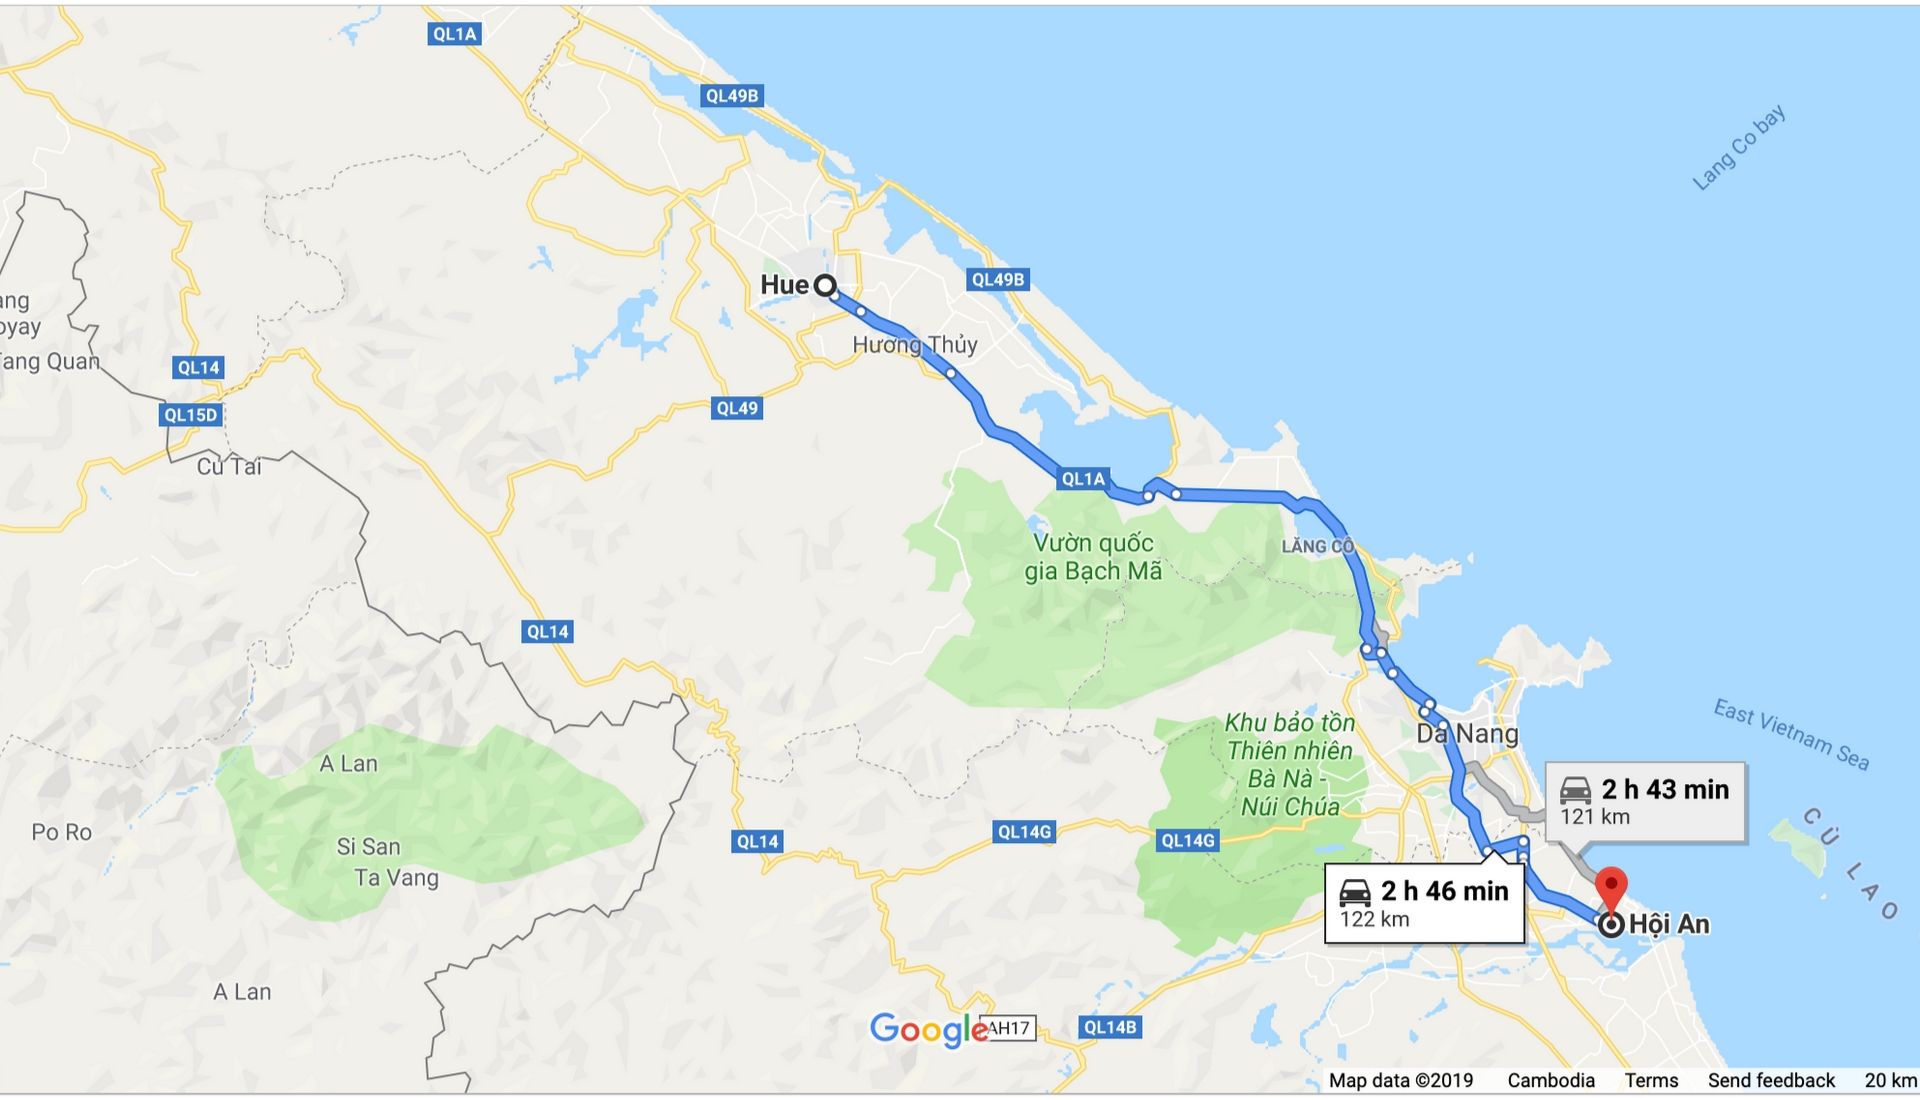 Map of journey from Hue to Hoi An